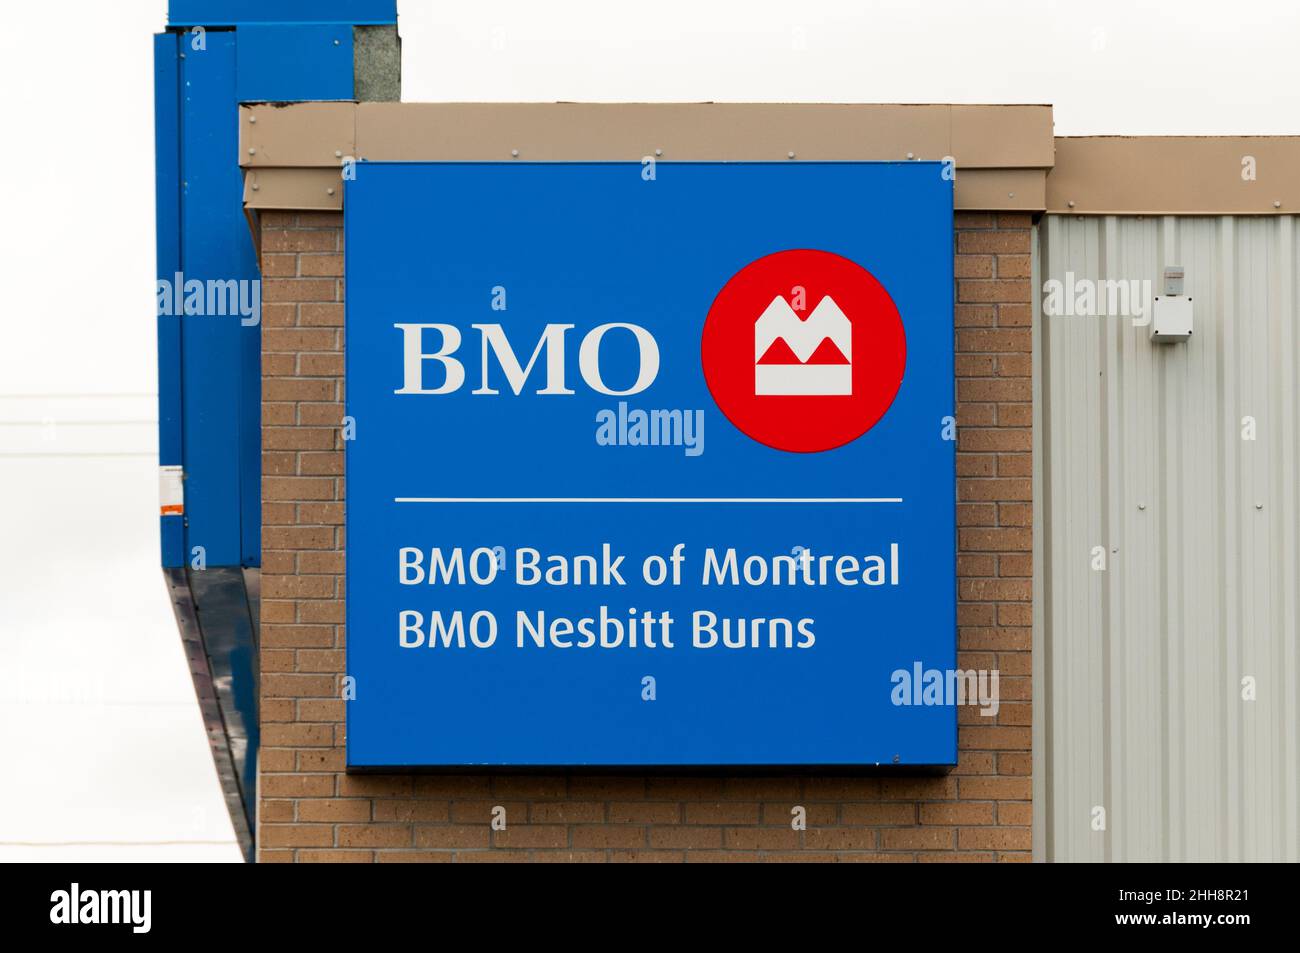 BMO Bank of Montreal sign on a building in Gander, Newfoundland, Canada. Stock Photo